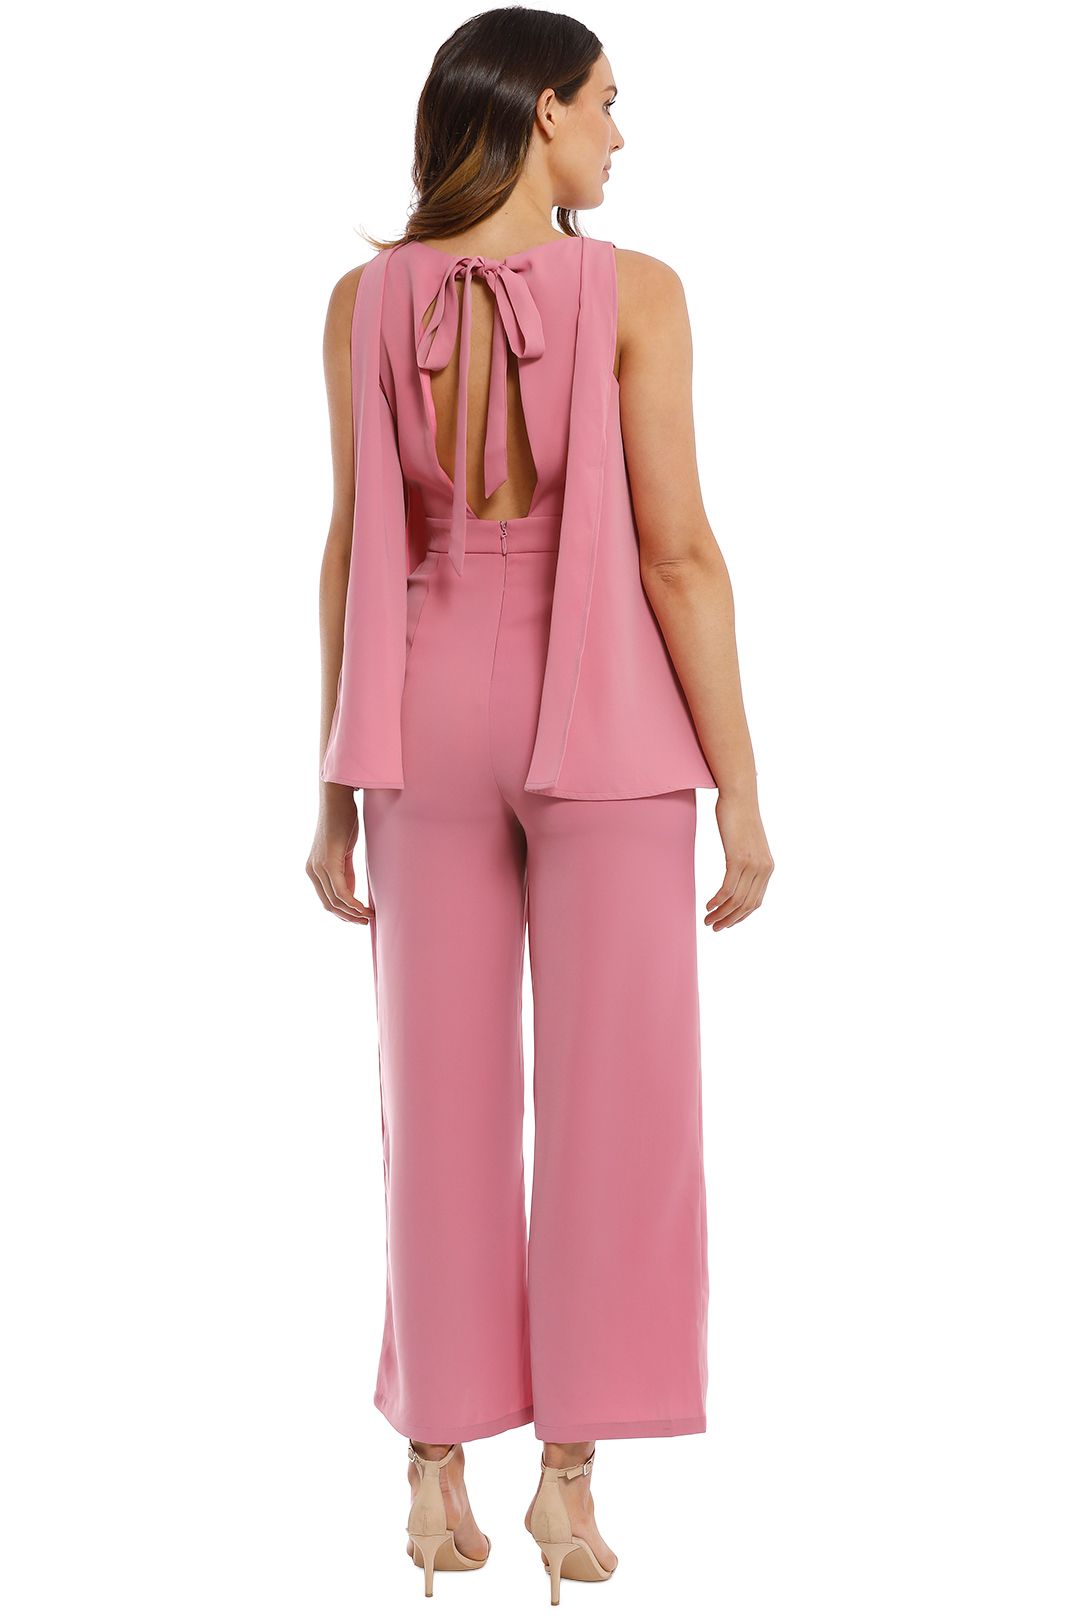 Mossman - Go With The Flow Jumpsuit - Pink Musk - Back